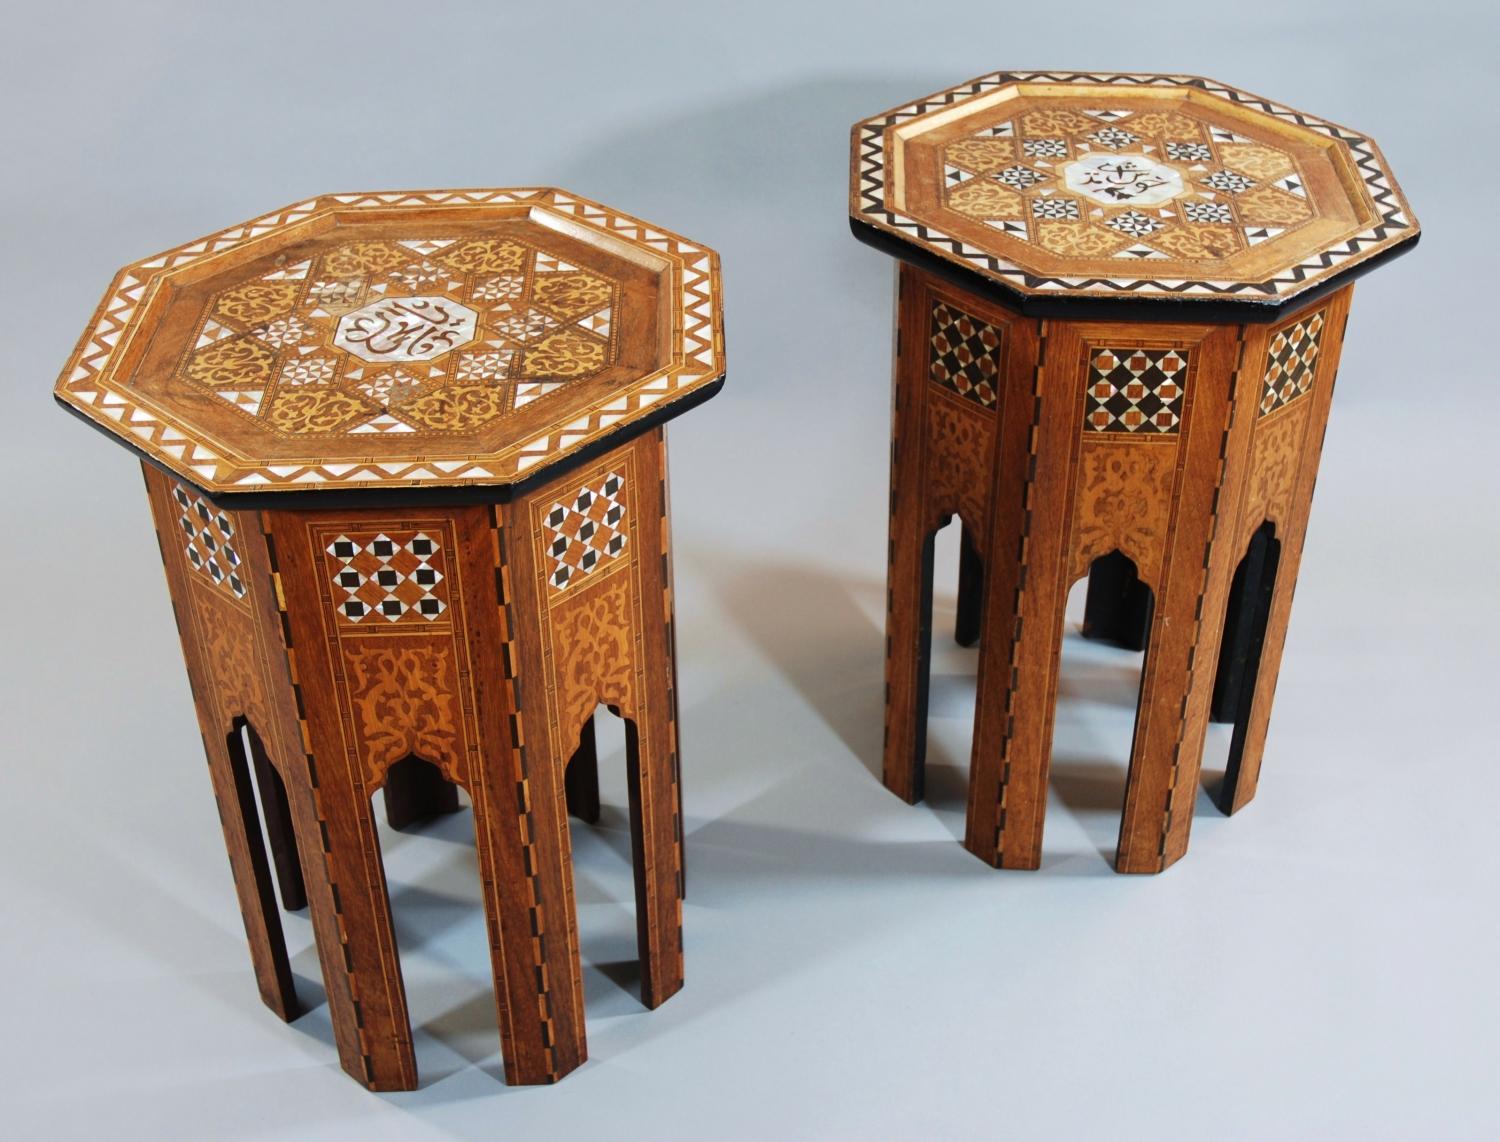 A near pair of Liberty & Co. coffee stools